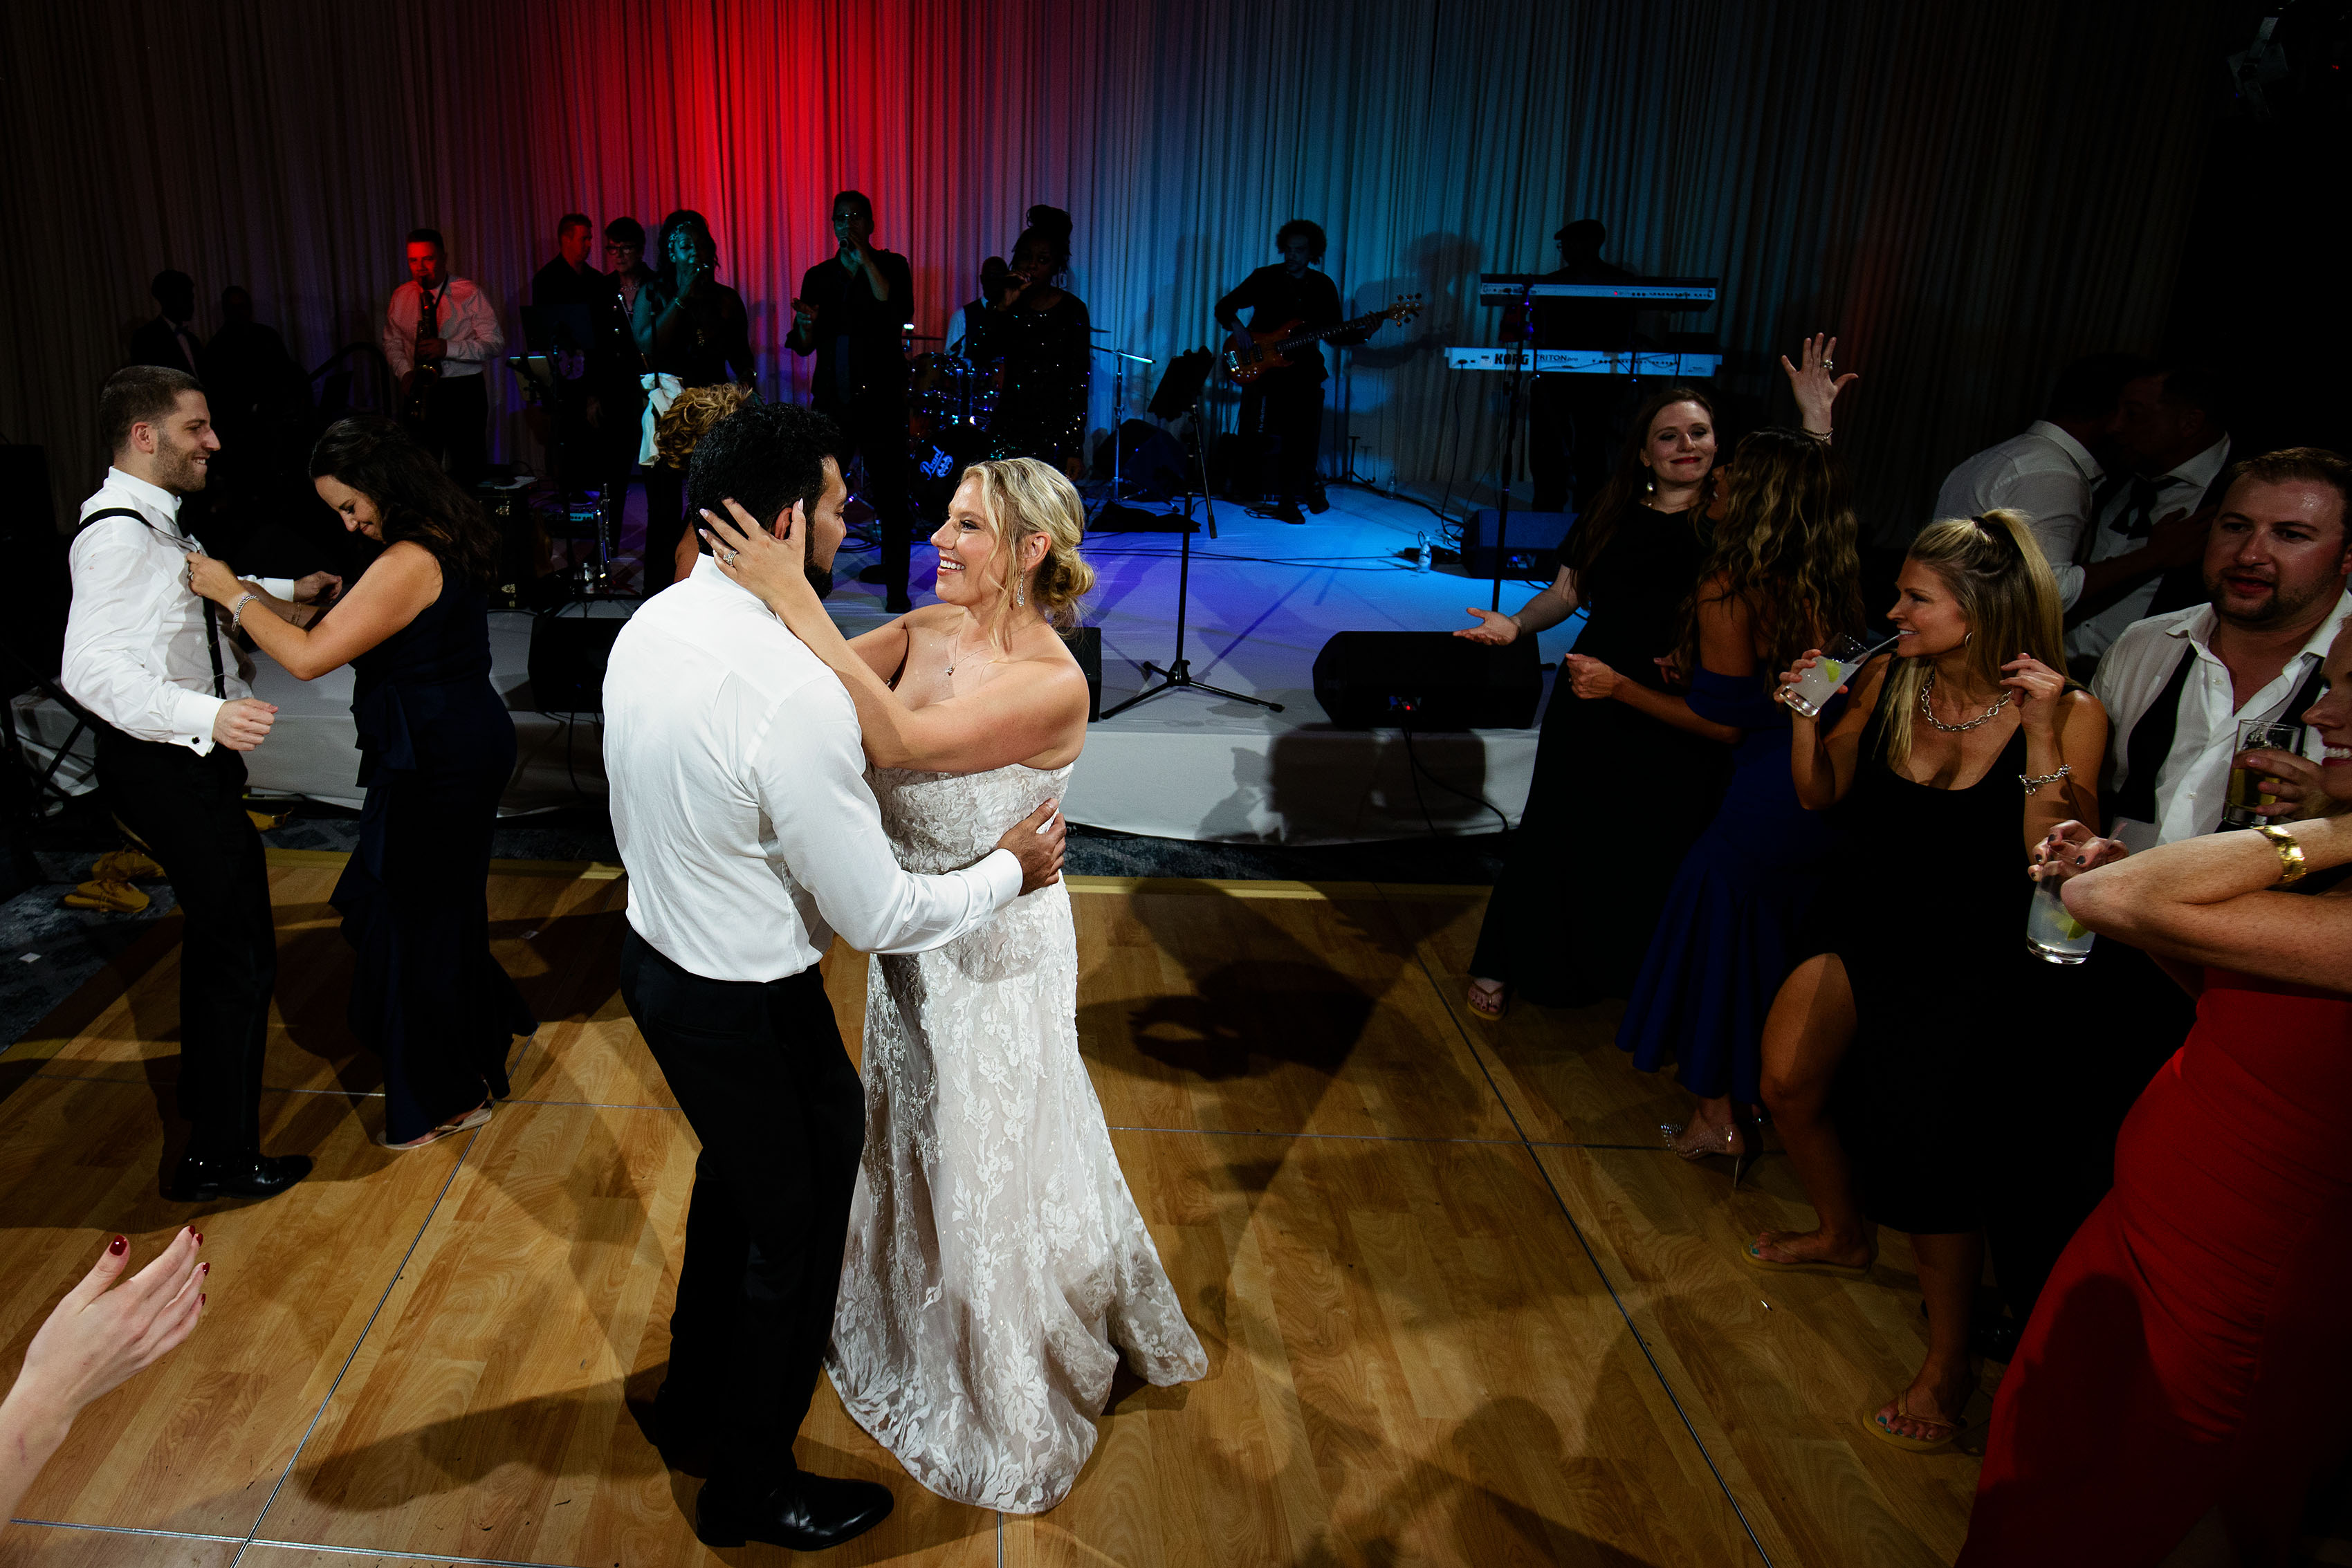 Guests dance during a wedding reception at Four Seasons Hotel Denver